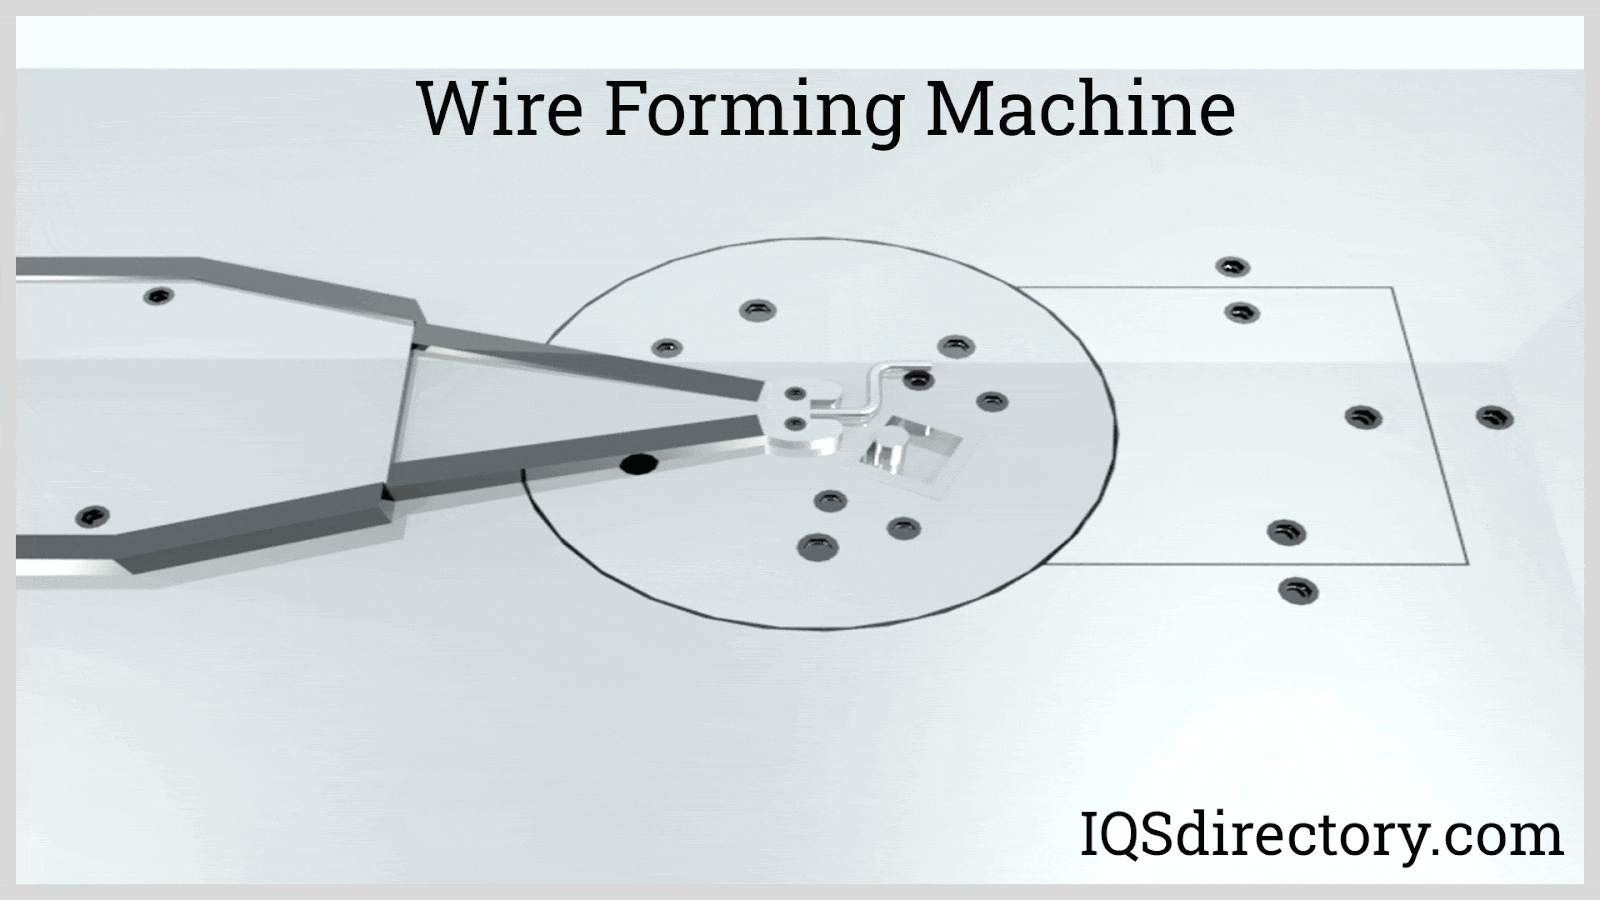 Wire Forming: What Is It? How Does It Work? Types & Uses